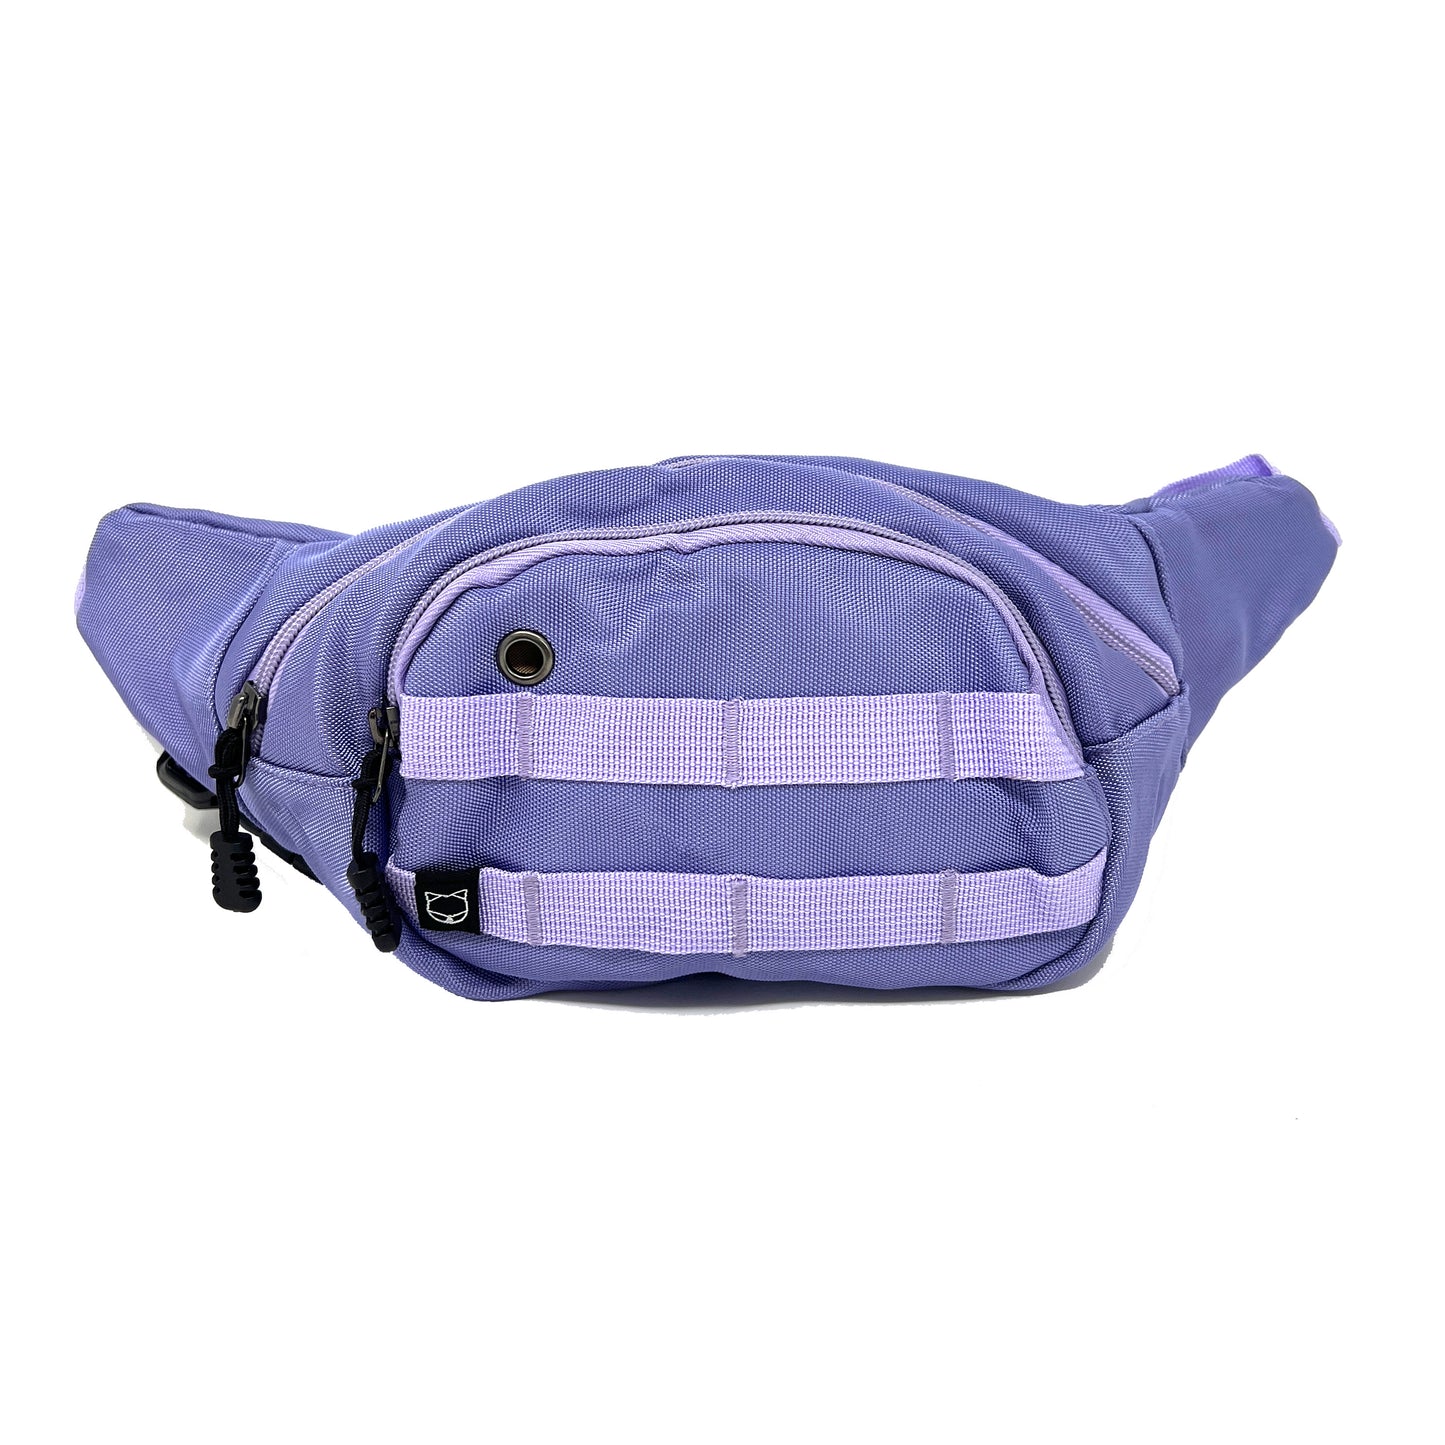  Fanny Pack for dog walking and training. There are multiple compartments and straps in the front where you can clip stuff onto. There is a poop bag dispenser in the front for easy access. The strap is adjustable.